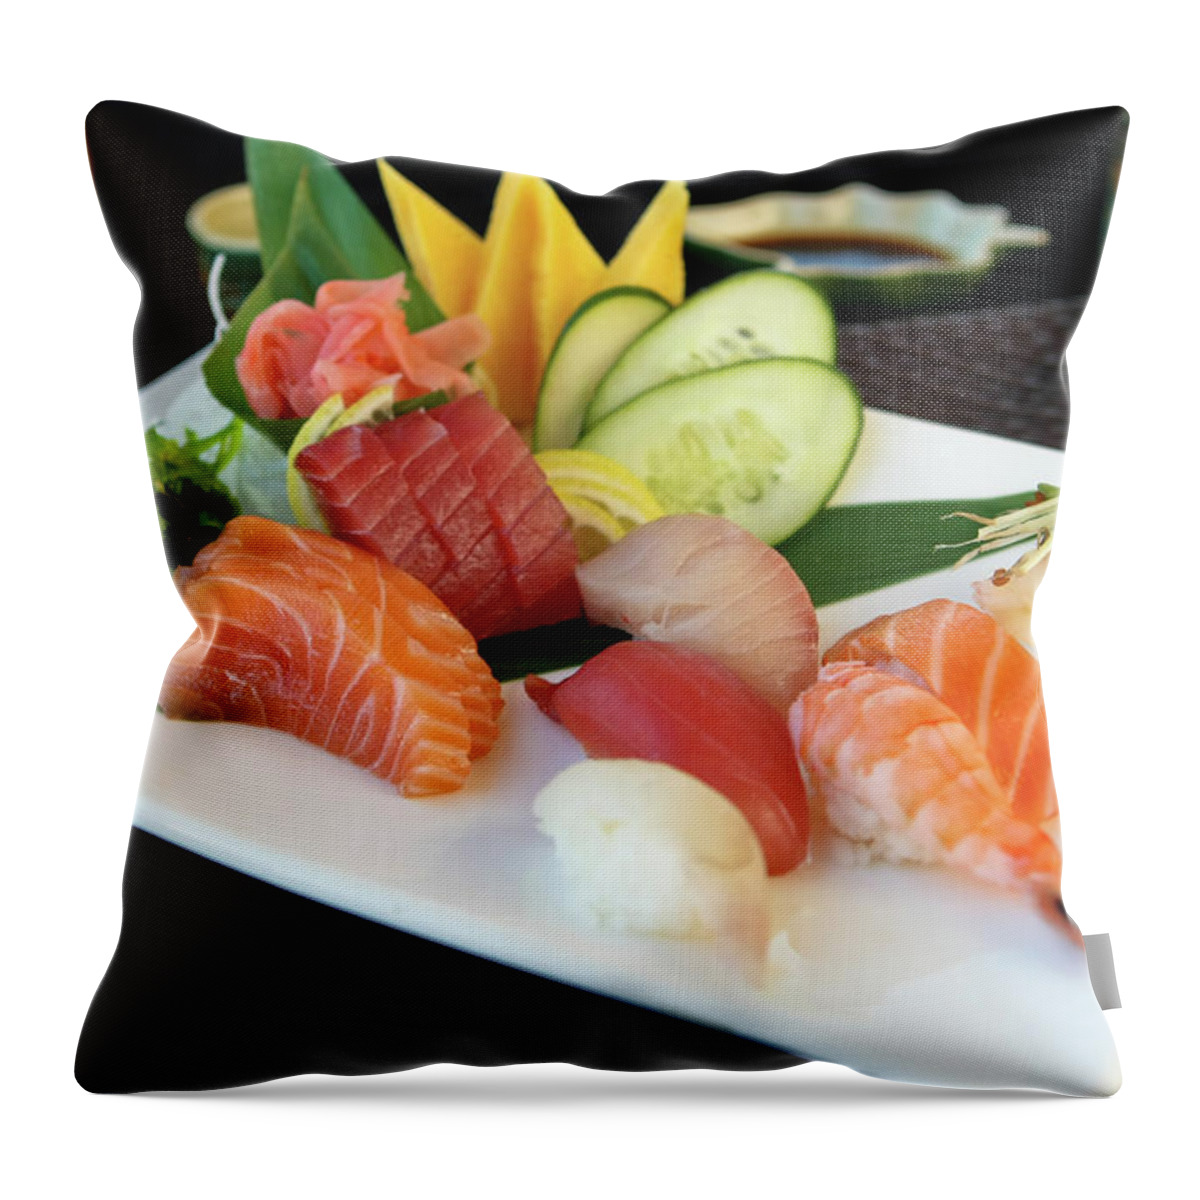 Raw Food Diet Throw Pillow featuring the photograph Sushi by Adrlnjunkie